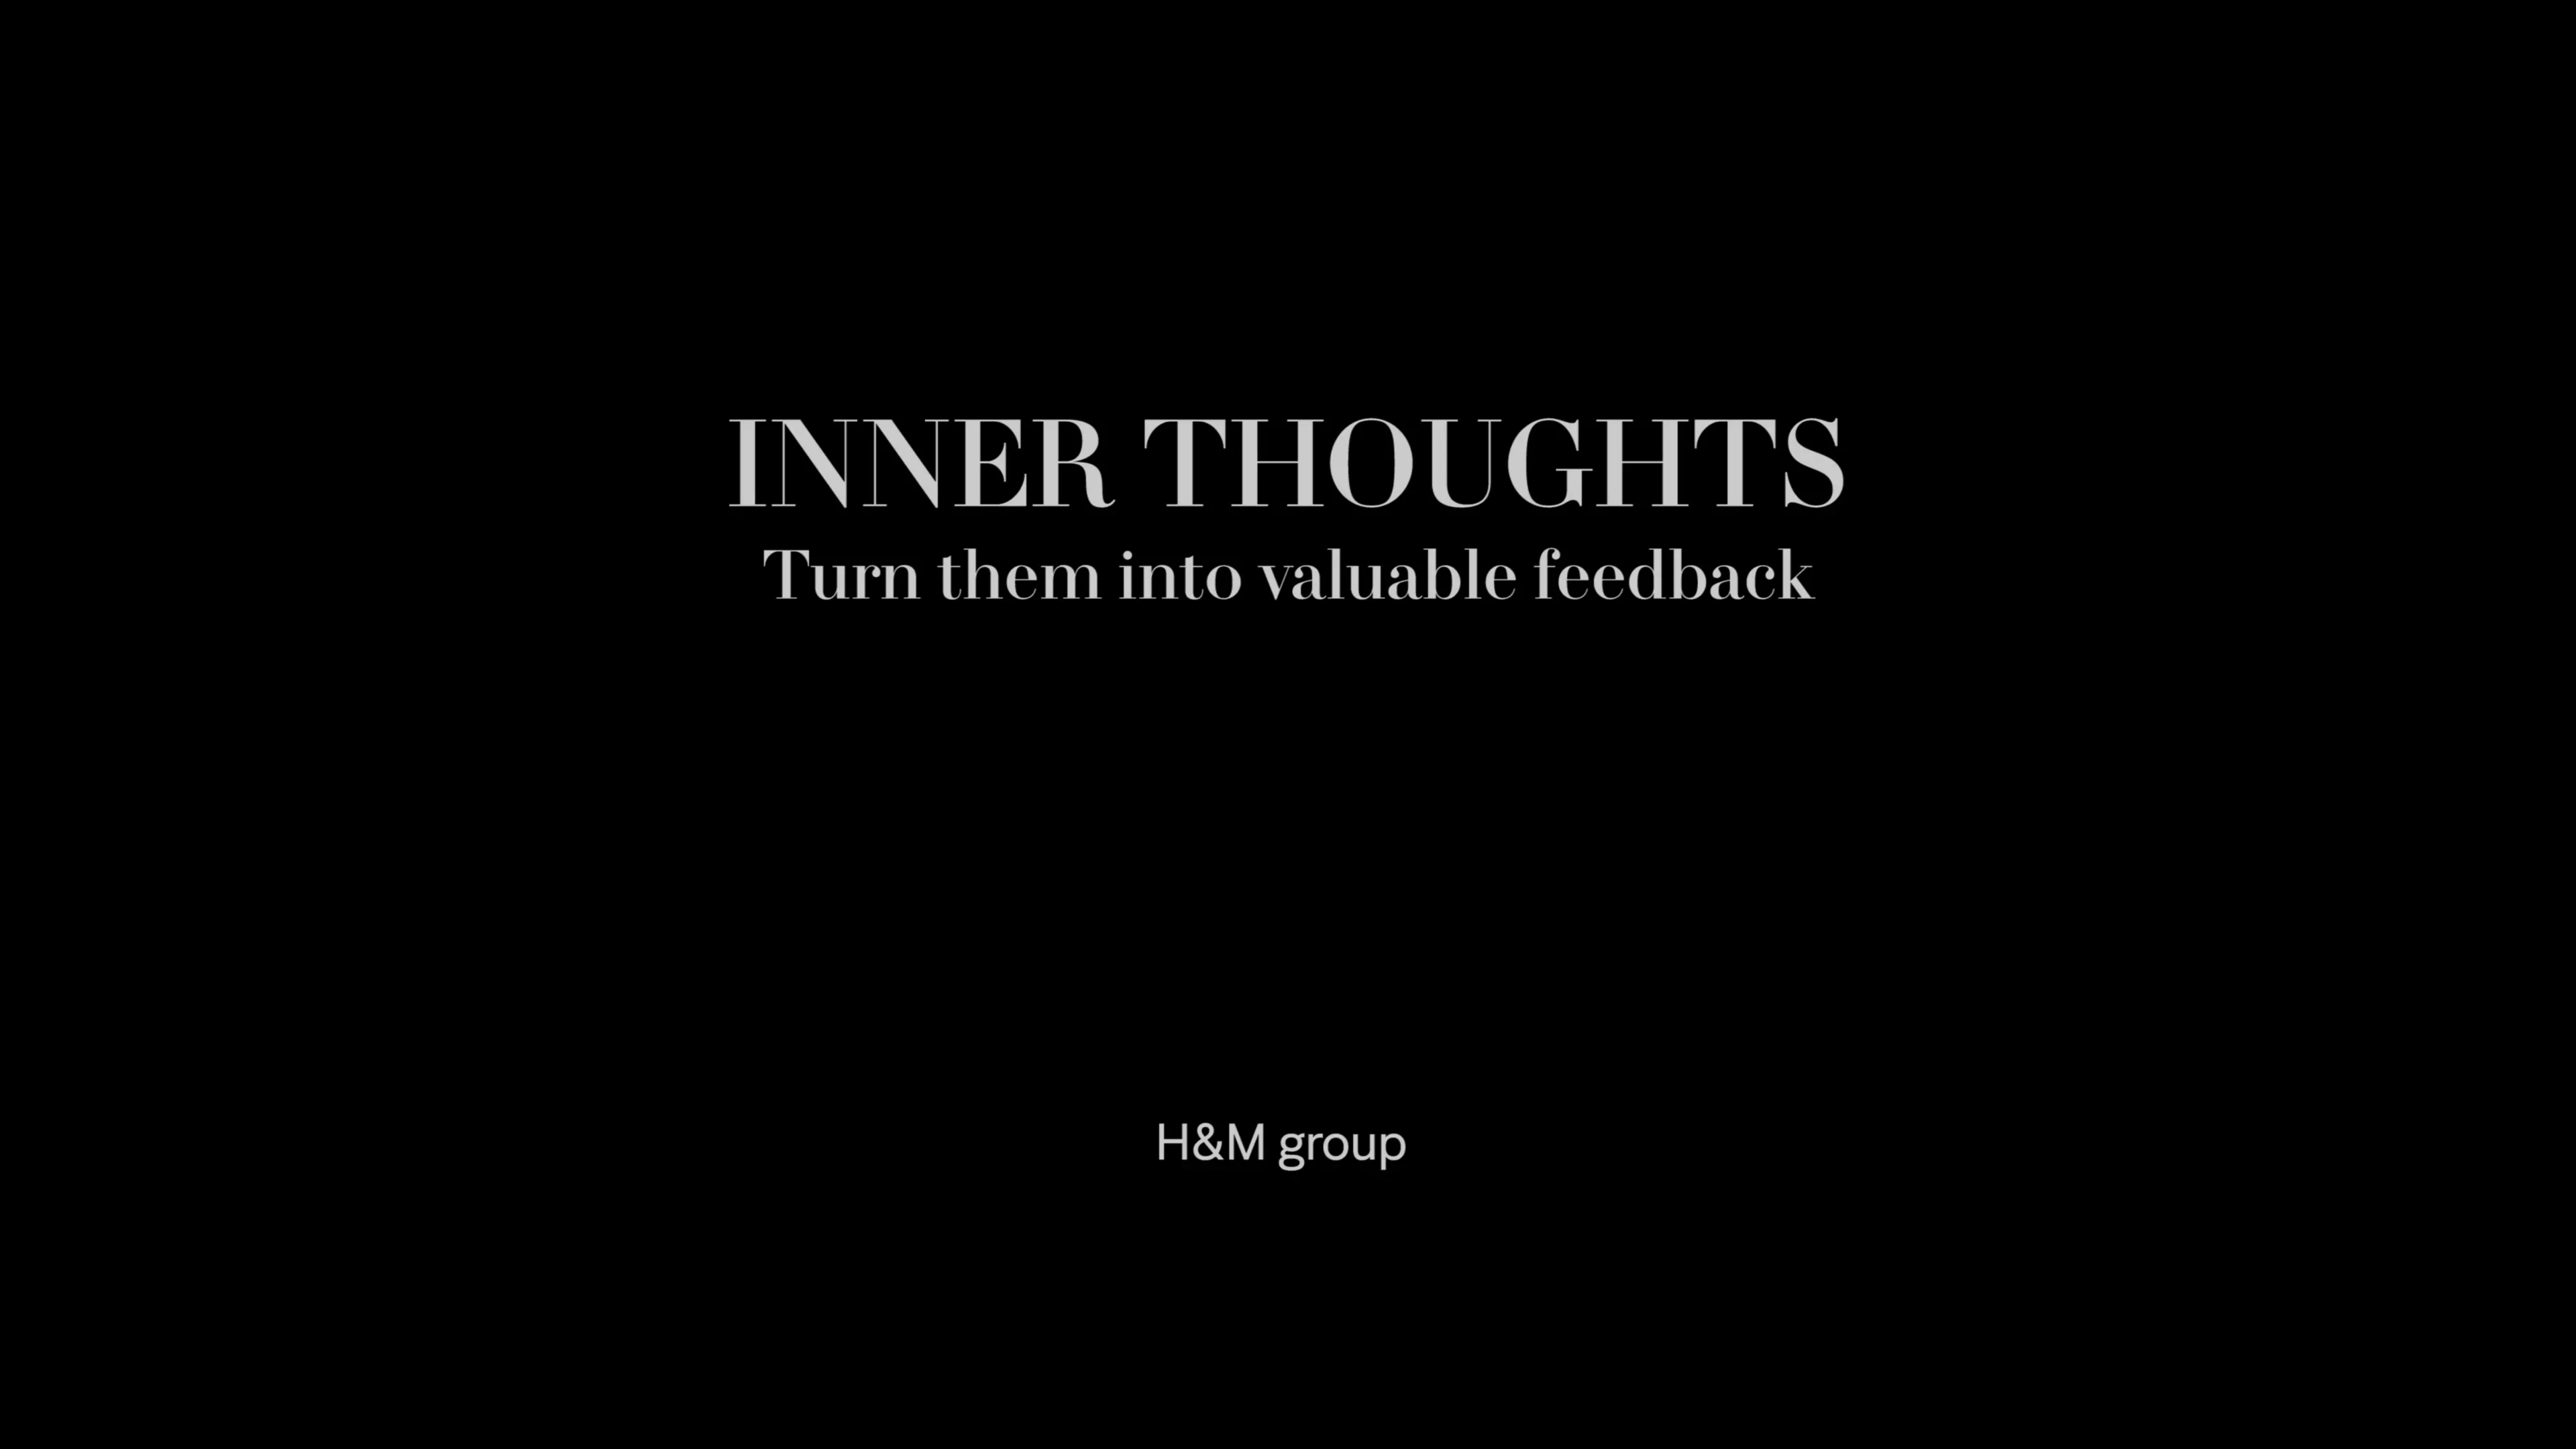 H&M Group - Inner Thoughts (short) on Vimeo